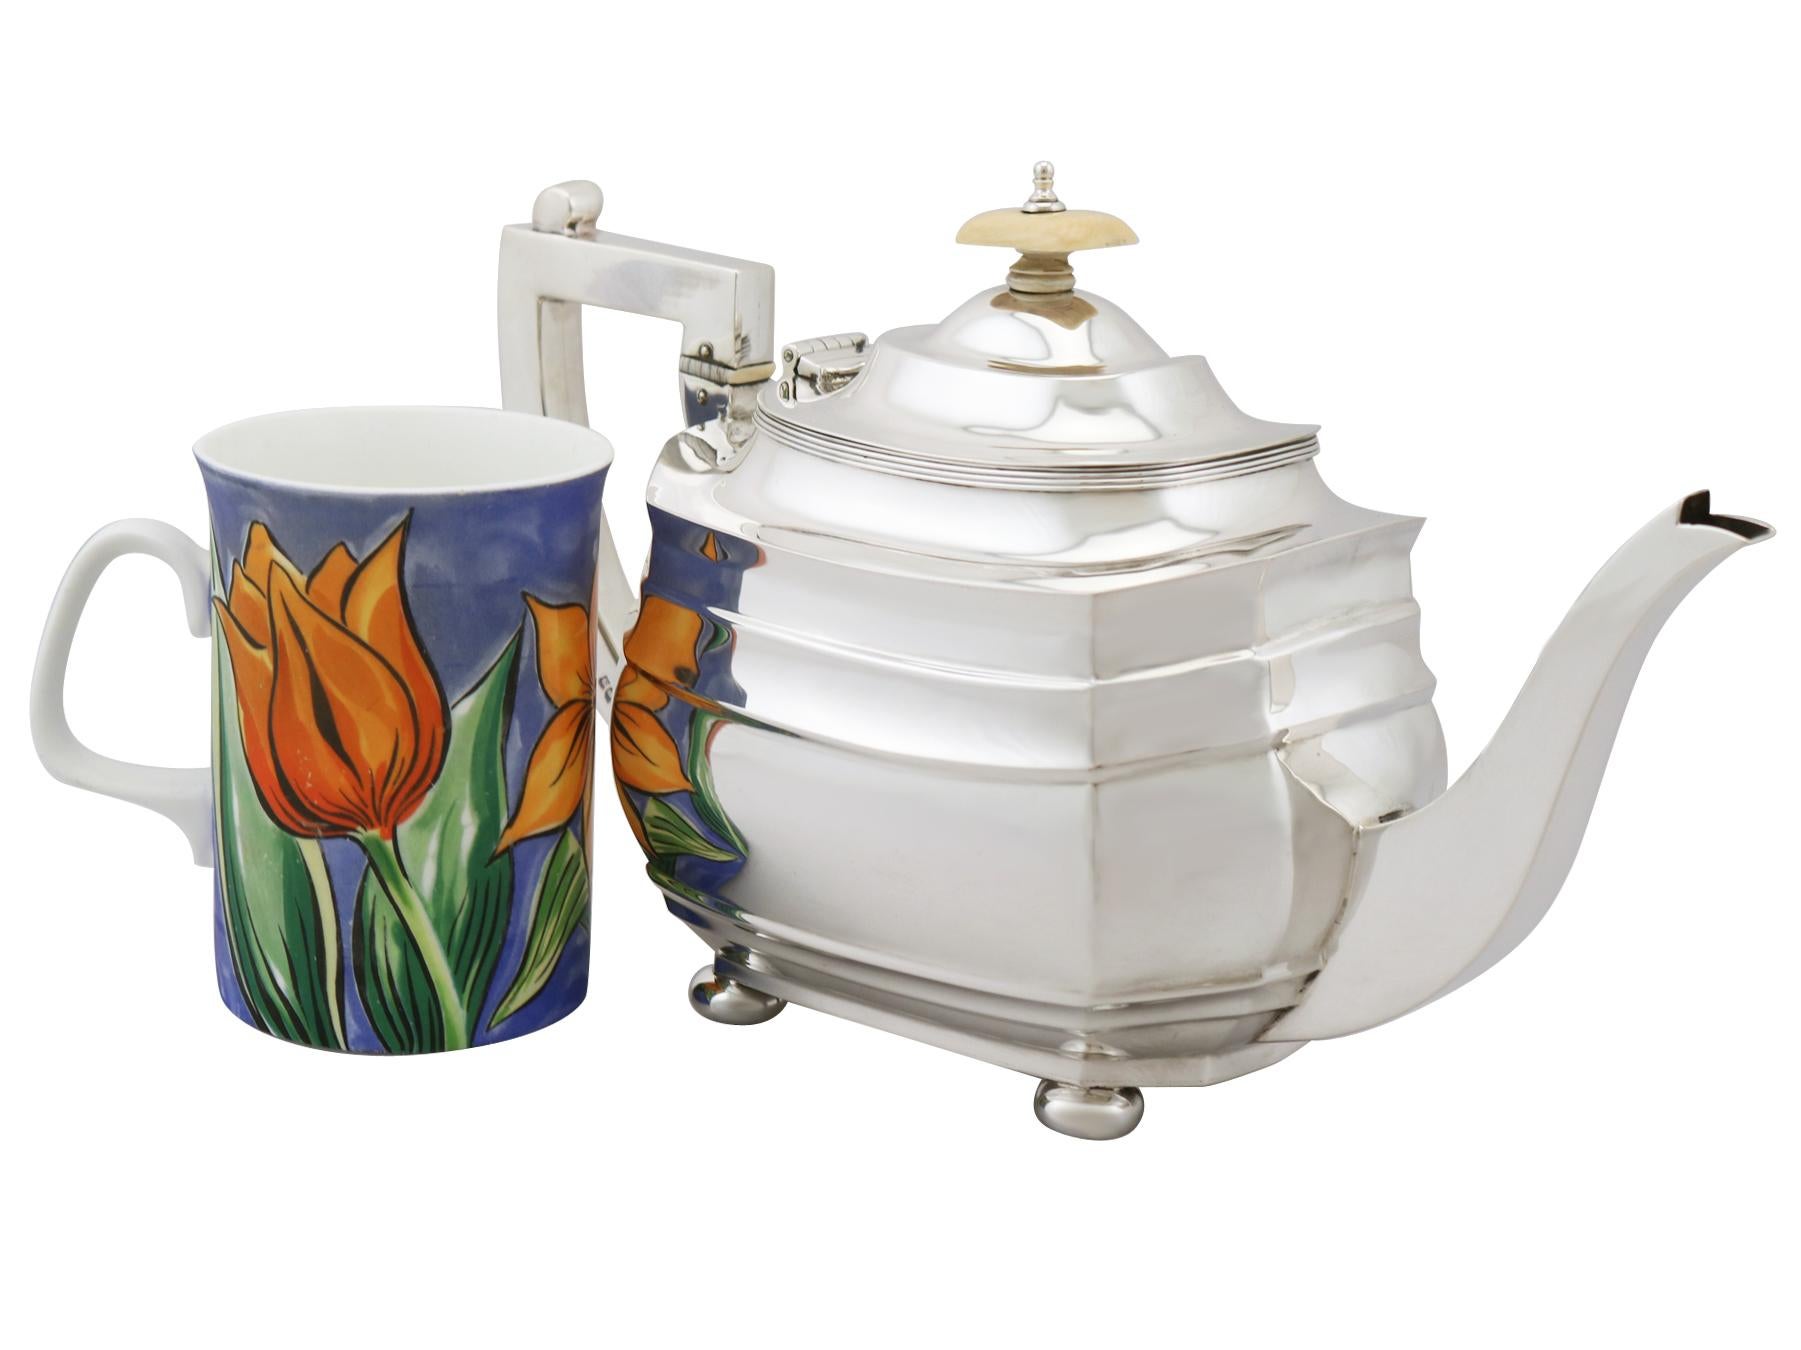 British S. Blanckensee & Sons Ltd 1917 English Sterling Silver Teapot For Sale